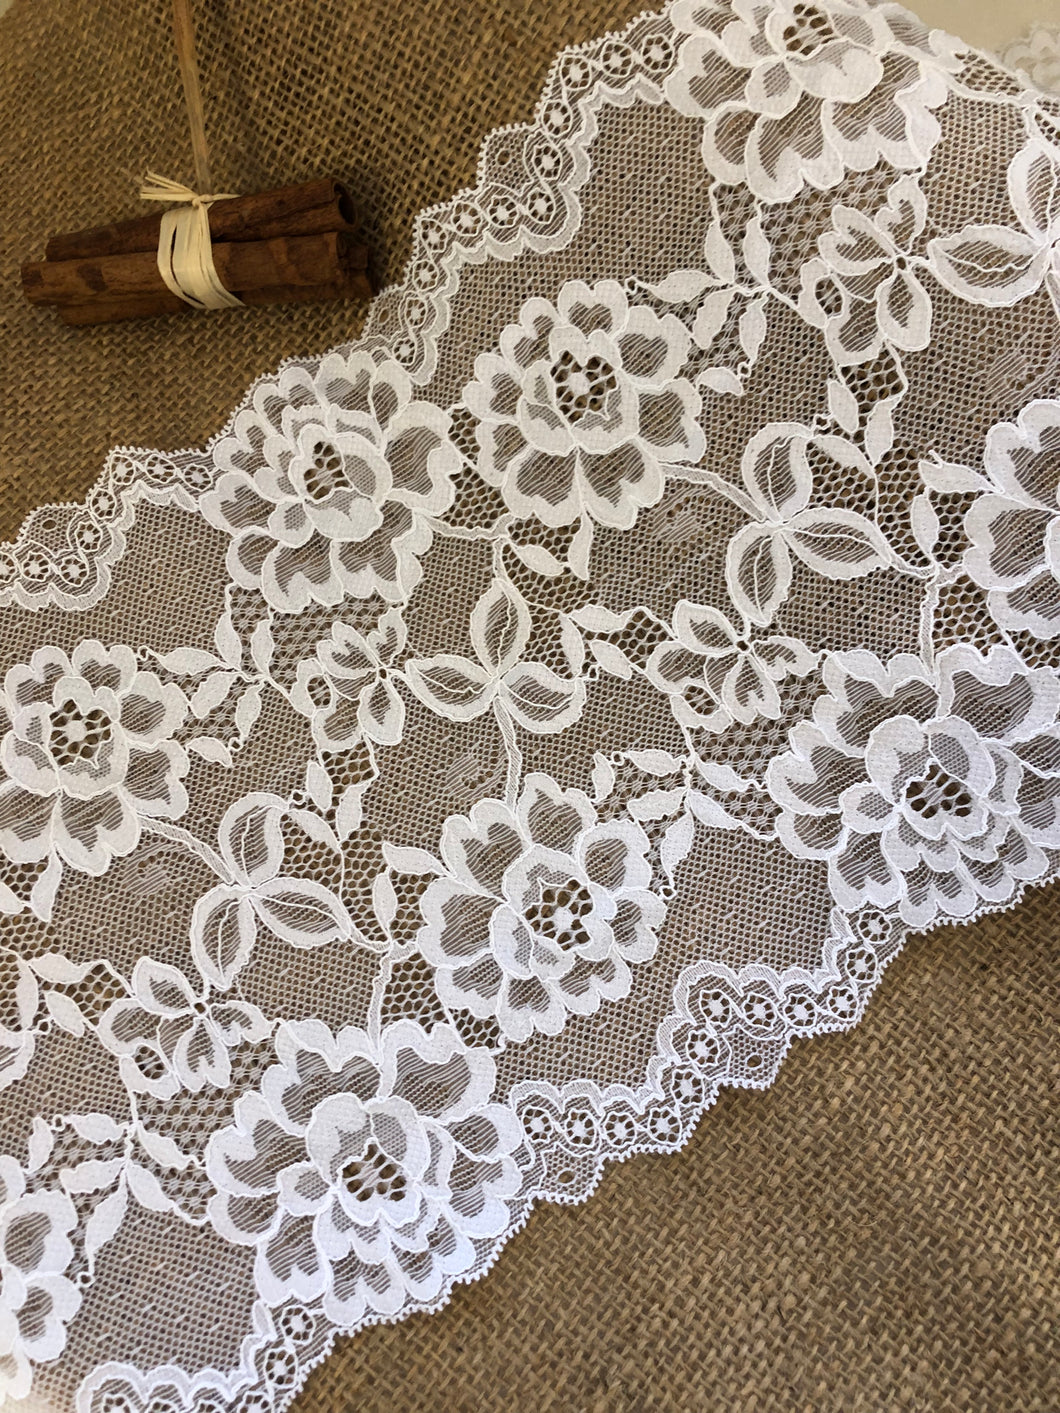 23cm Lace Fabric Delicate Lace Trim with Wide Nylon Lace Scalloped